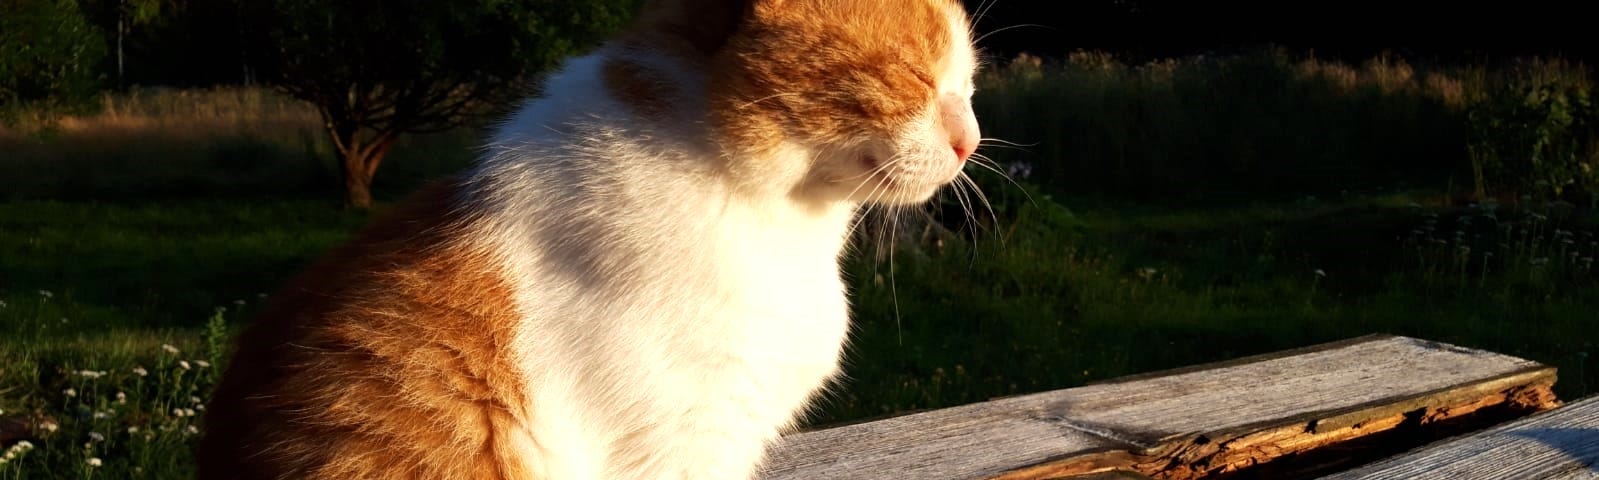 Ginger and white cat sitting on wooden bench with pine trees behind, enjoying the sun © The Cat and Dog House